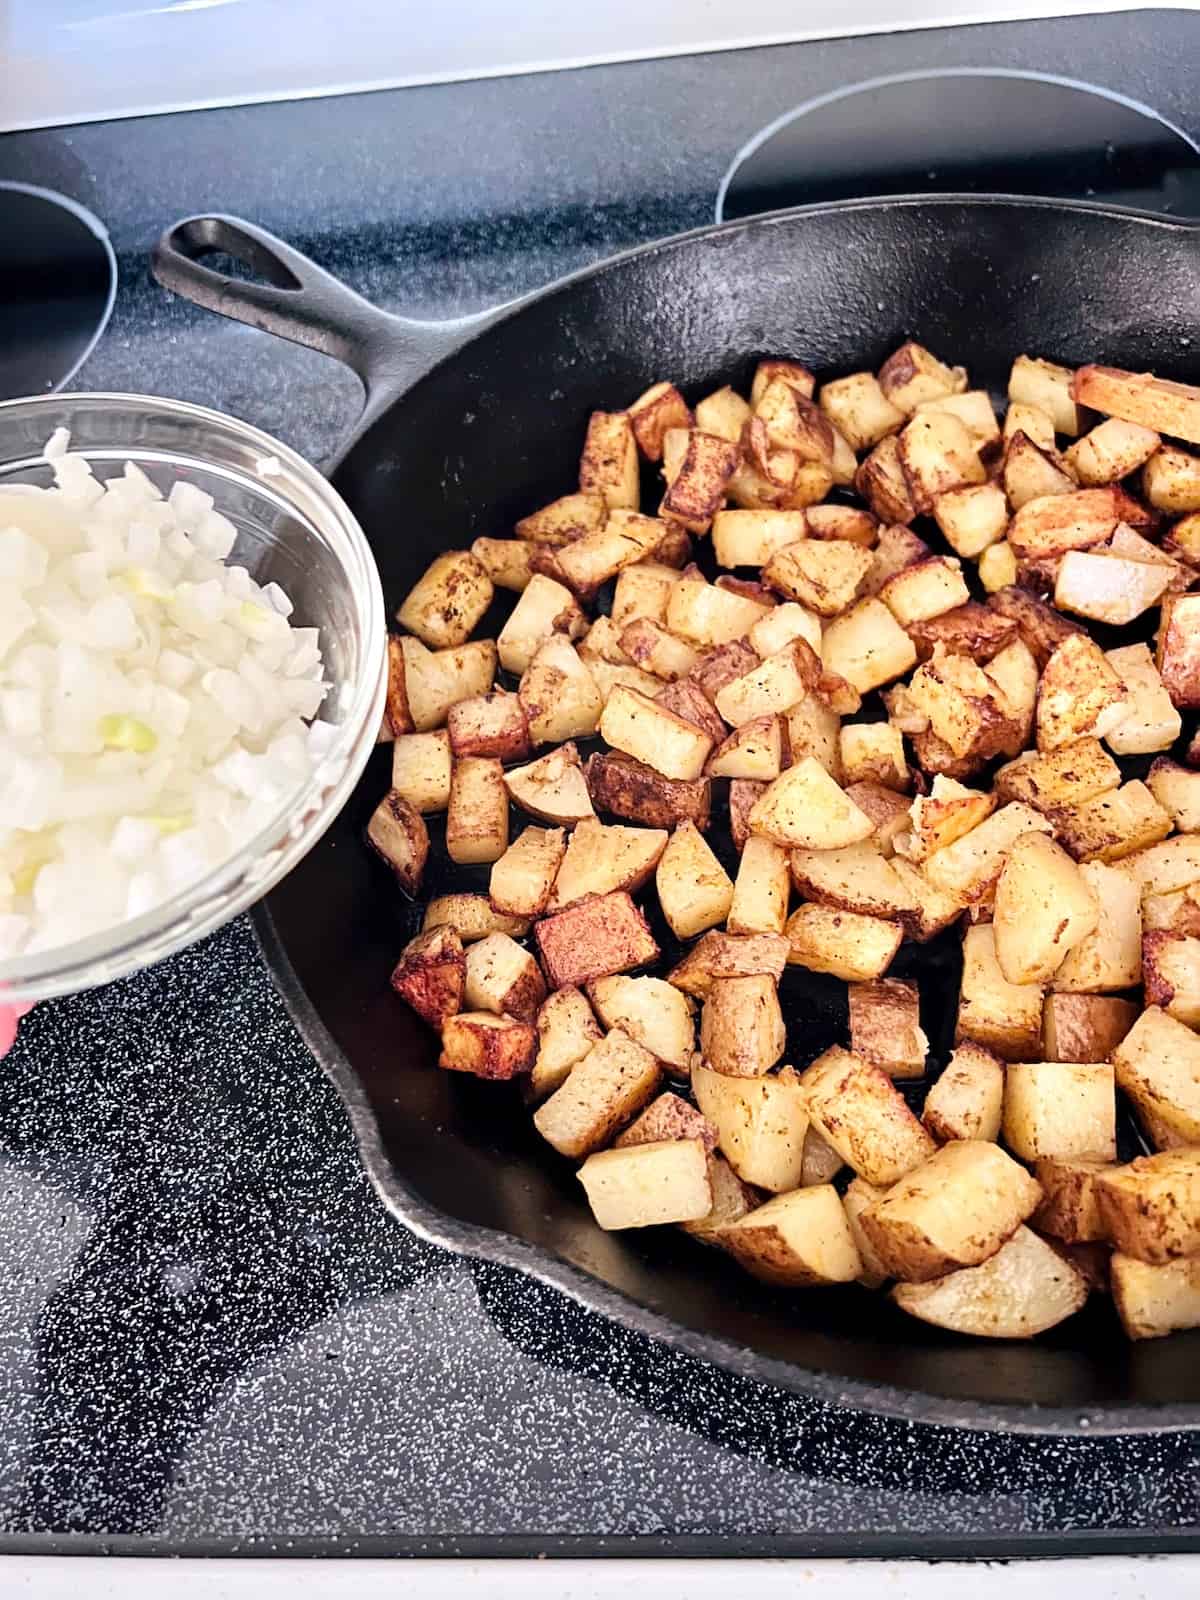 Adding chopped onions to potatoes in the skillet.